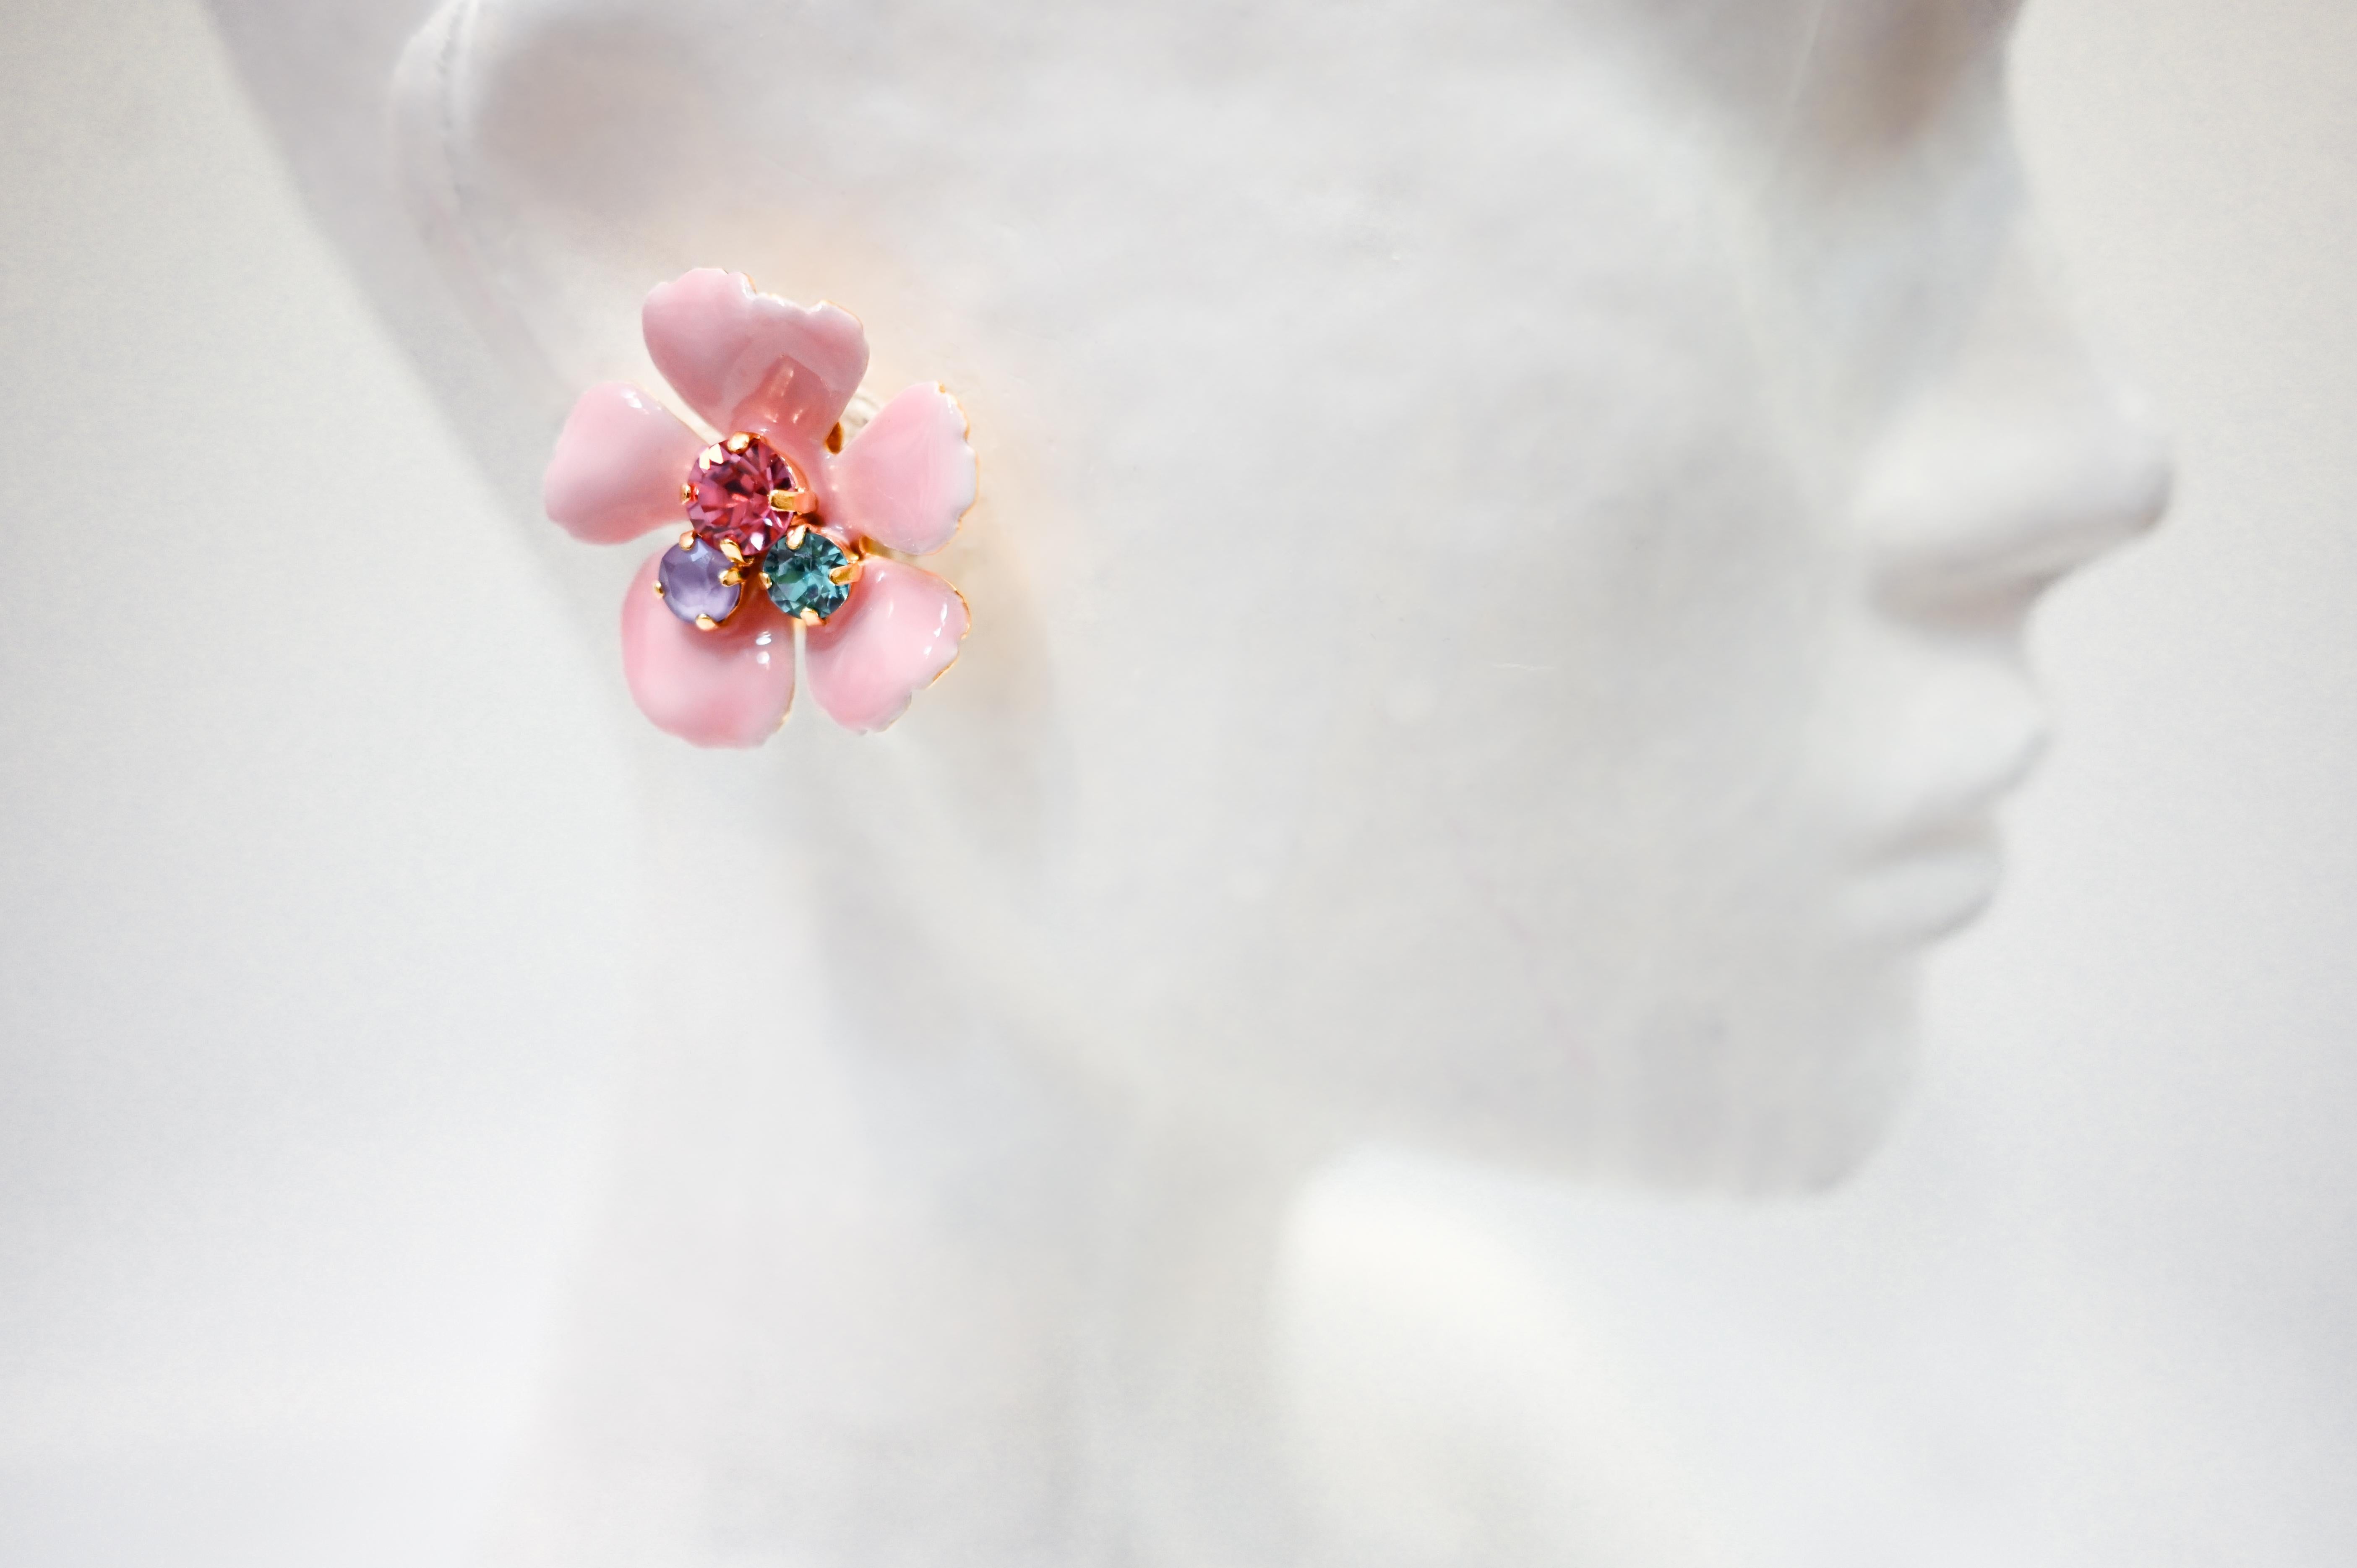 These earrings were made especially to wear with a one of a kind Flower Chocker From Philippe Ferrandis collection.
Enamel and Swarovski crystals.
Philippe Ferrandis has been a parurier in Paris since 1986. He creates two collections a year, always